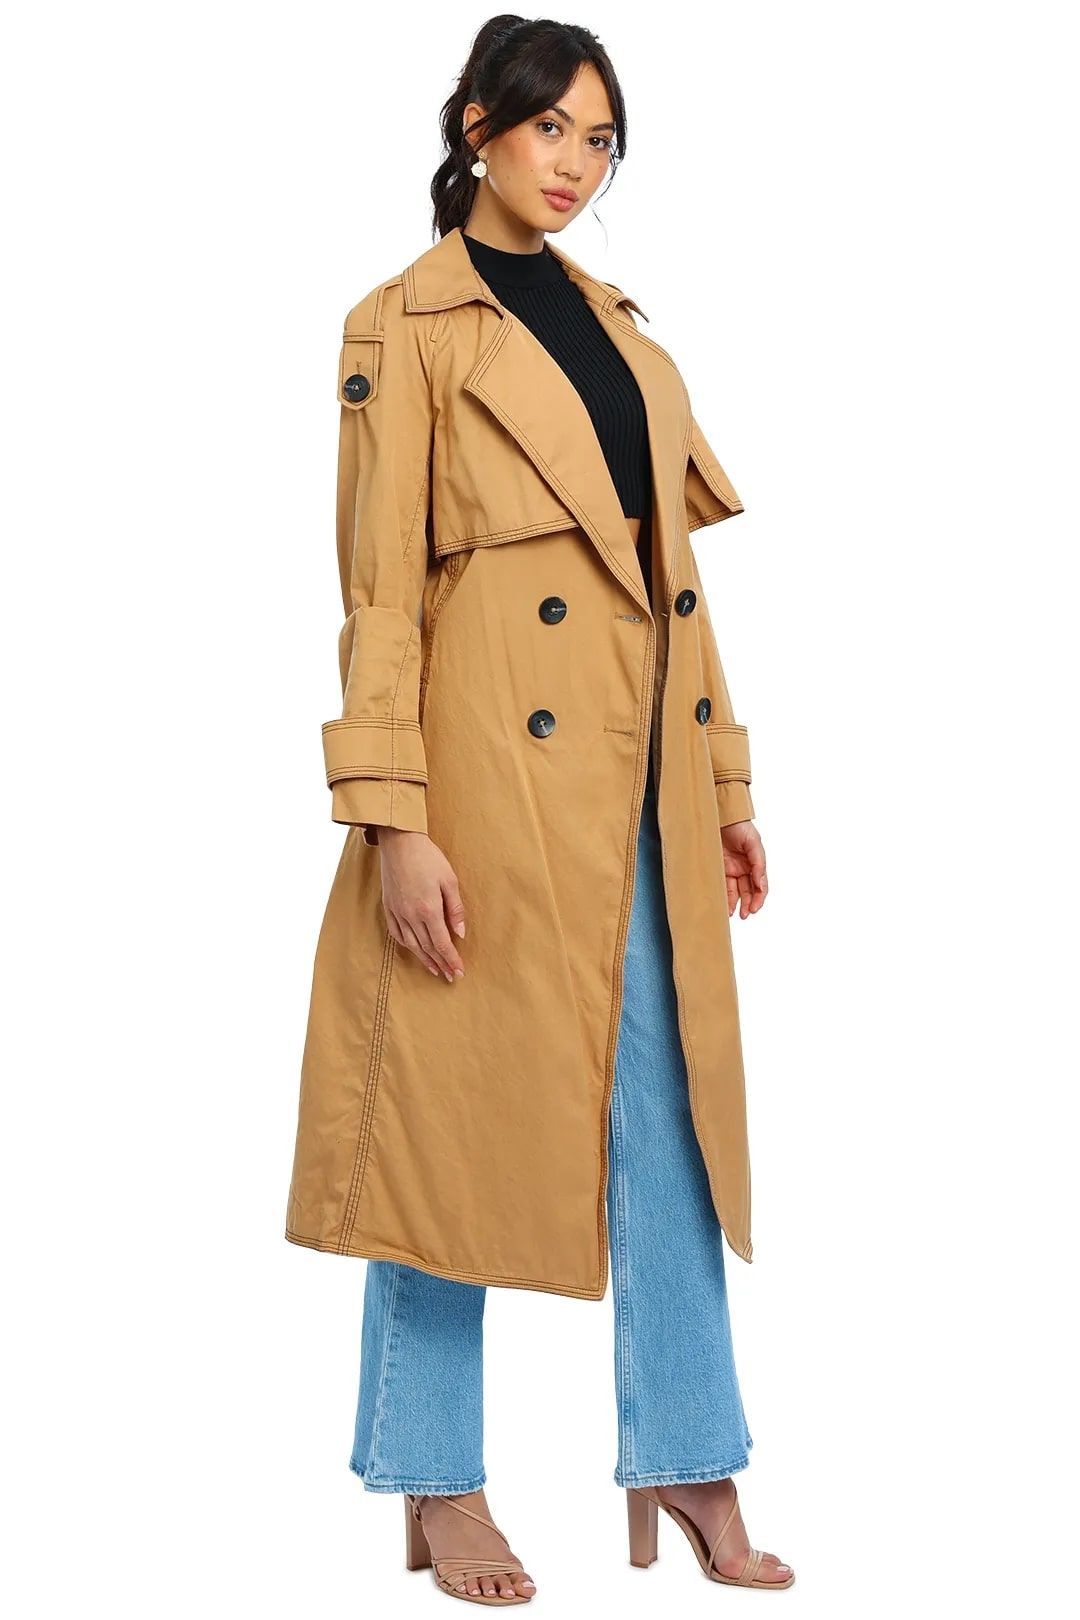 Stylish Acler Saratoga Trench in Biscuit for office wear, available for rent